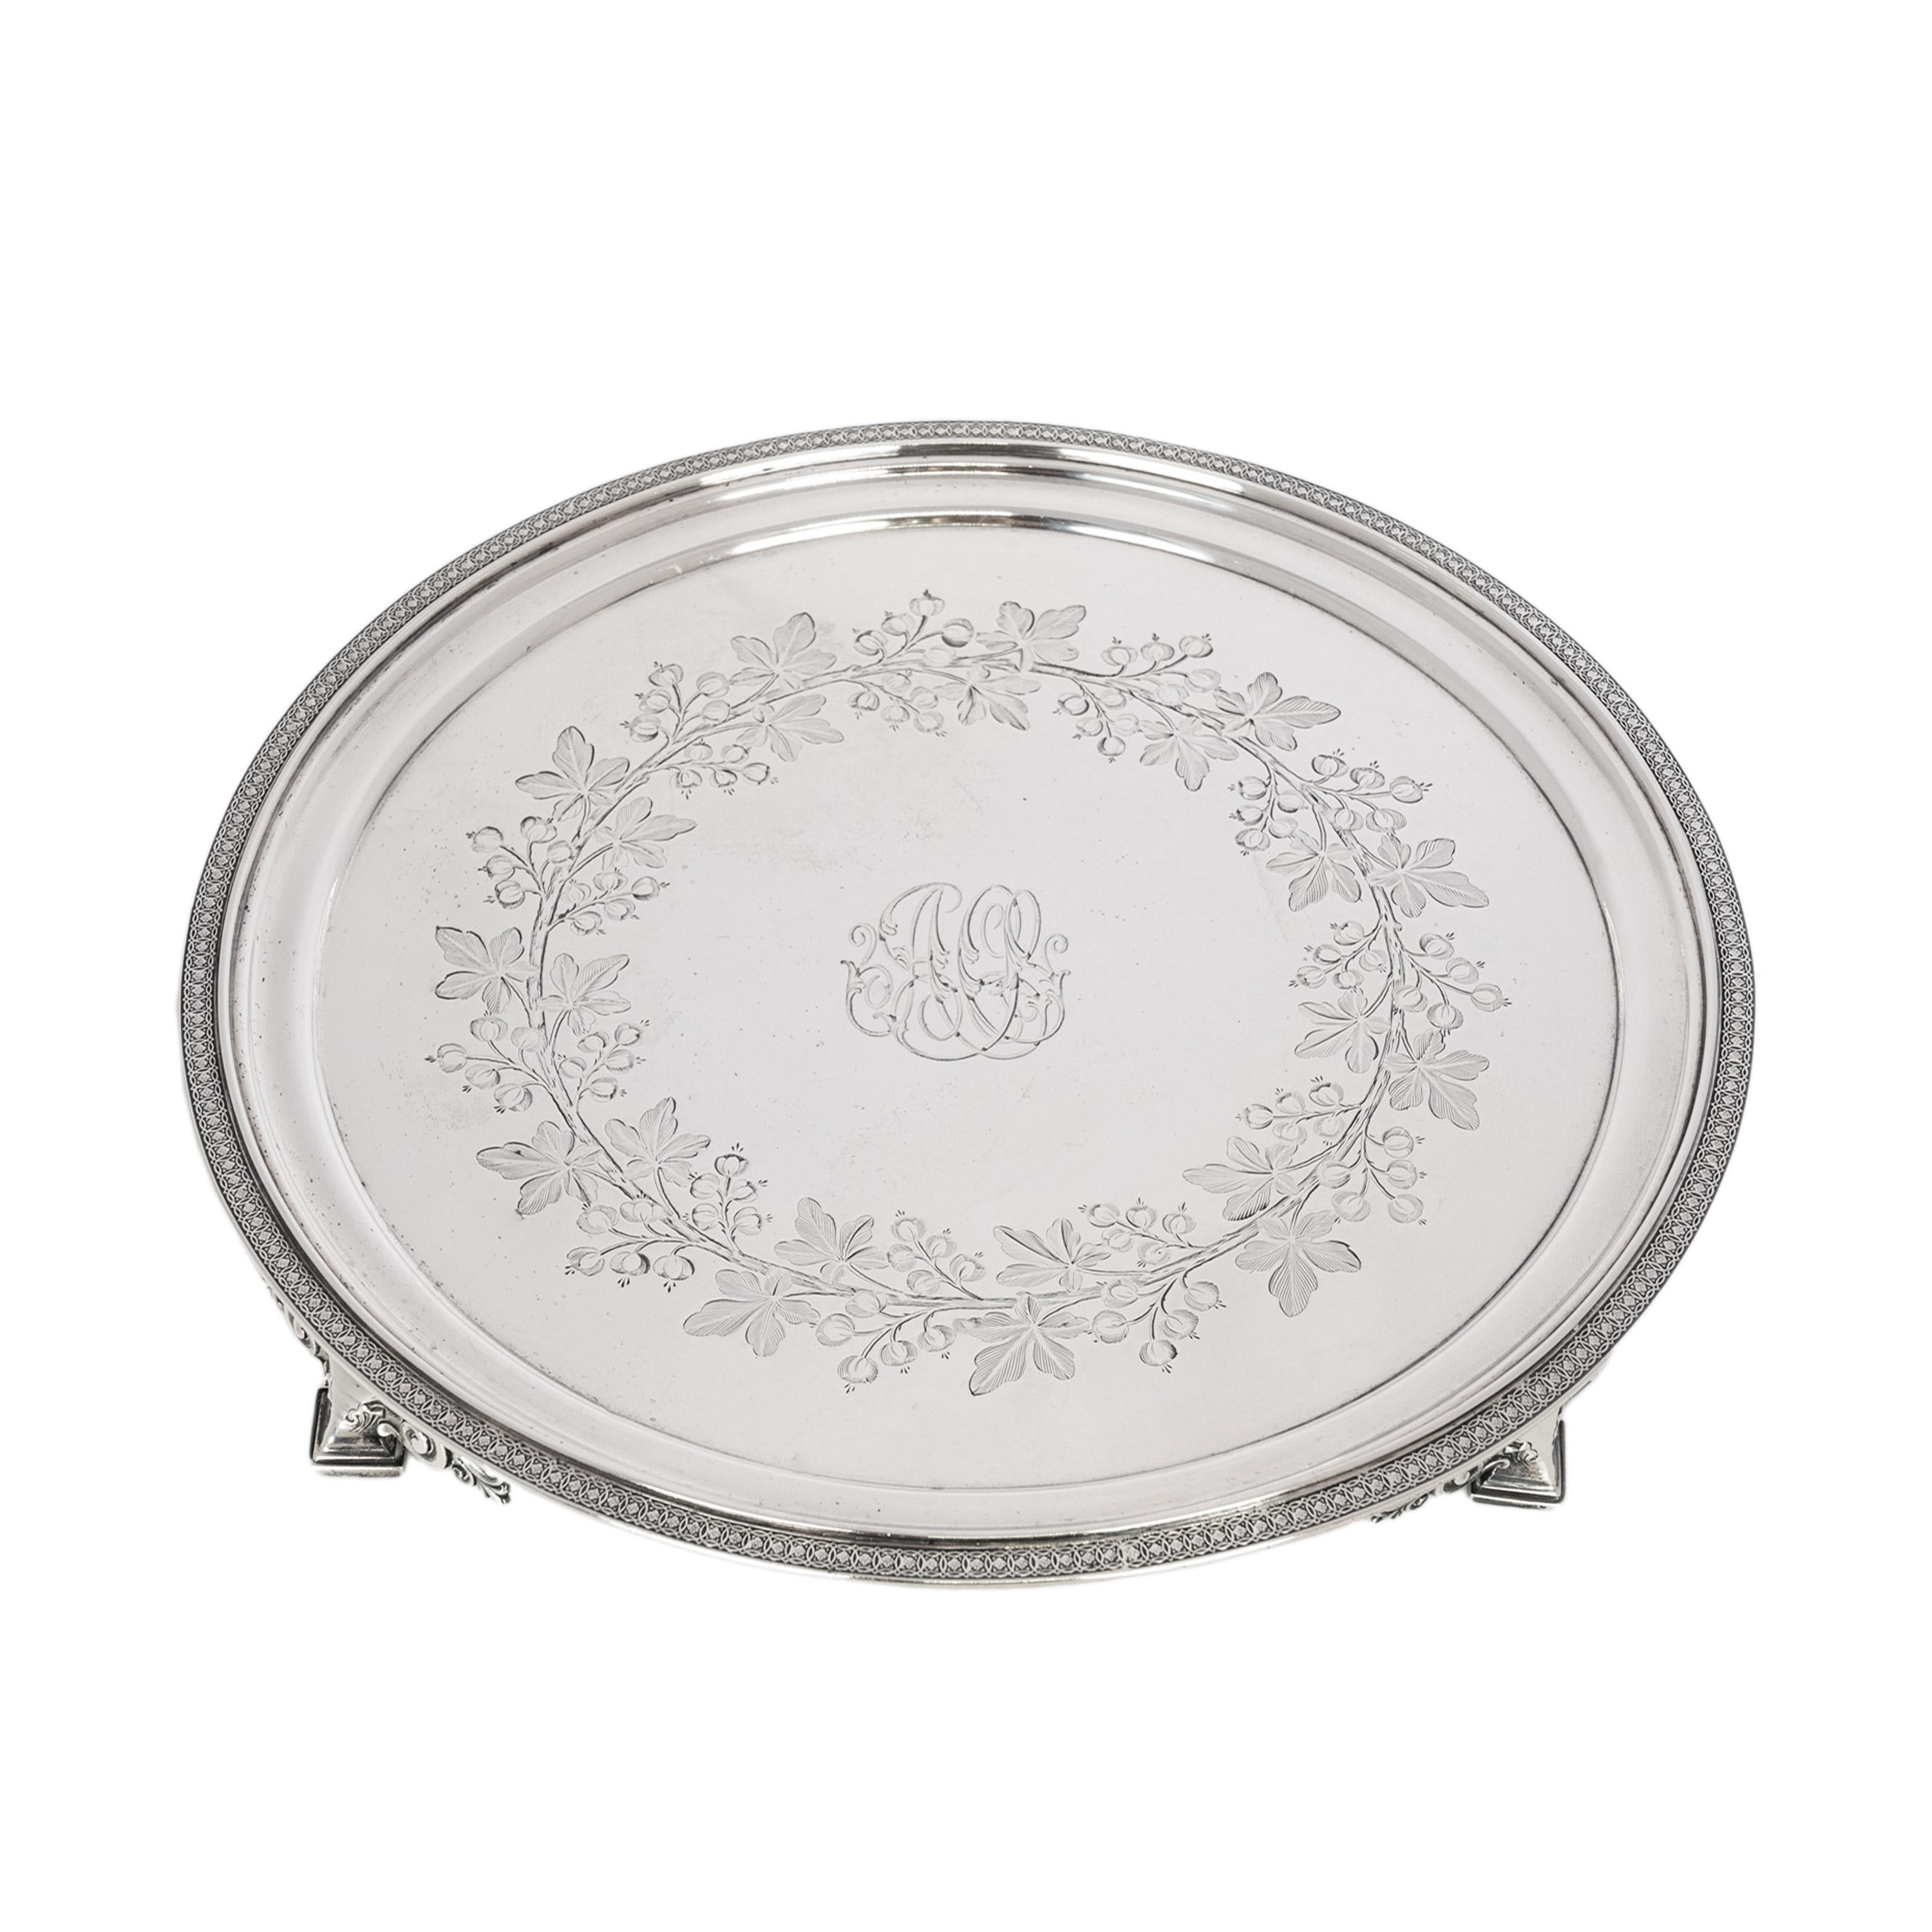 Antique Tiffany & Co footed sterling silver salver or tray, circa 1870.
The circular footed tray is engraved in the aesthetic taste with fruiting flowers and having an 'egg & dart' engraved border to the edge of the tray. Raised on four stepped feet